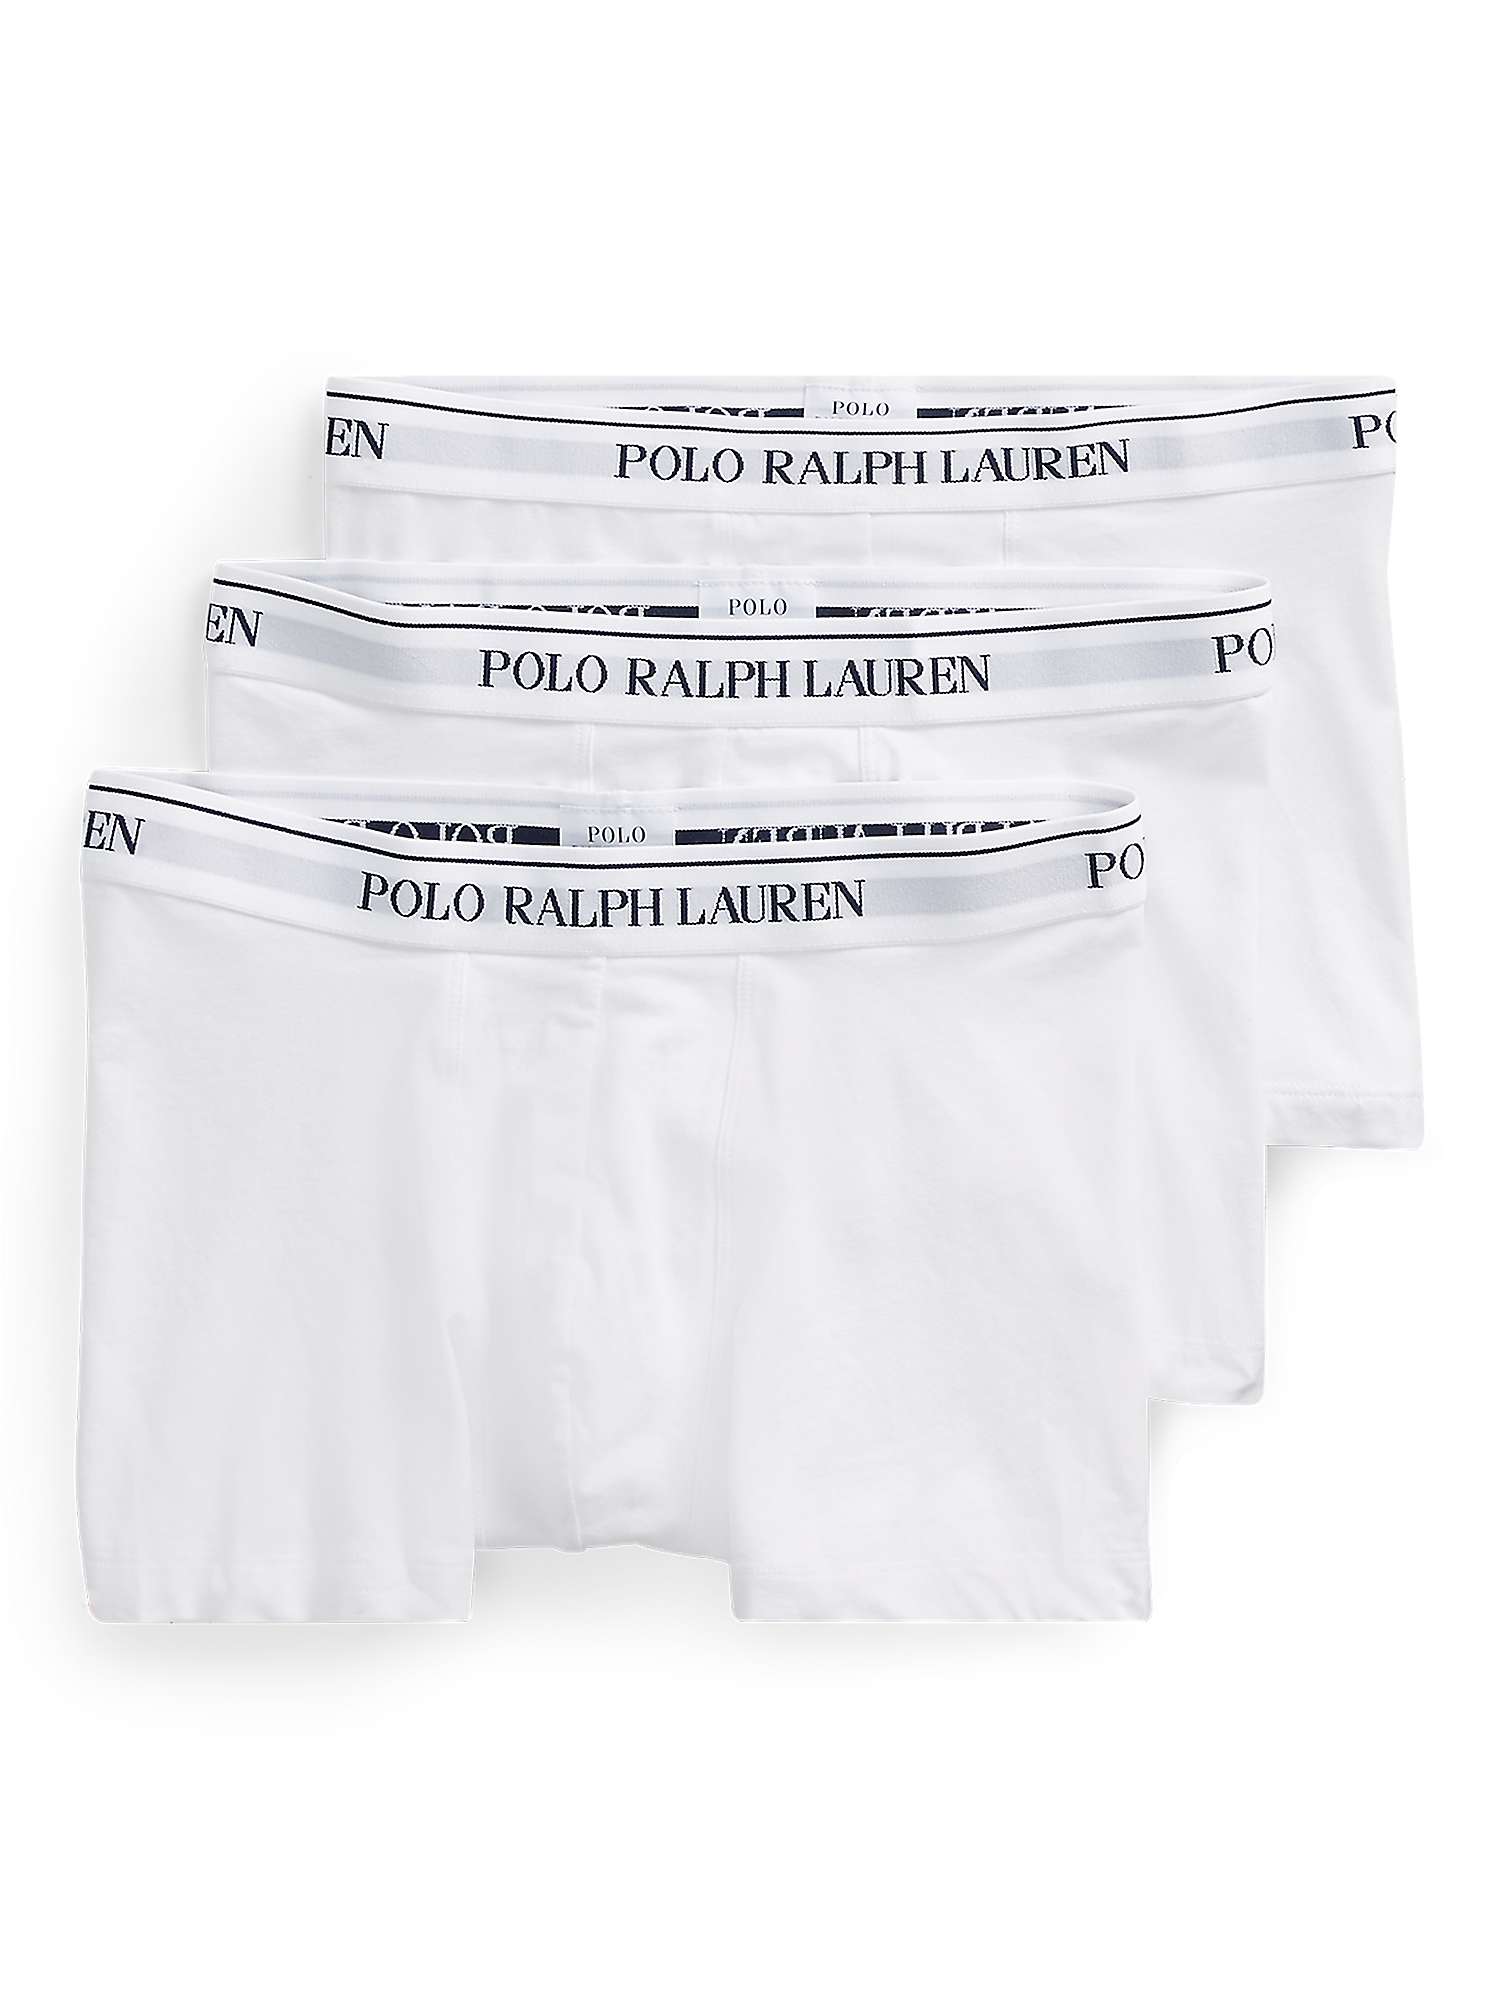 Polo Ralph Lauren Cotton Trunks, Pack of 3, White at John Lewis & Partners